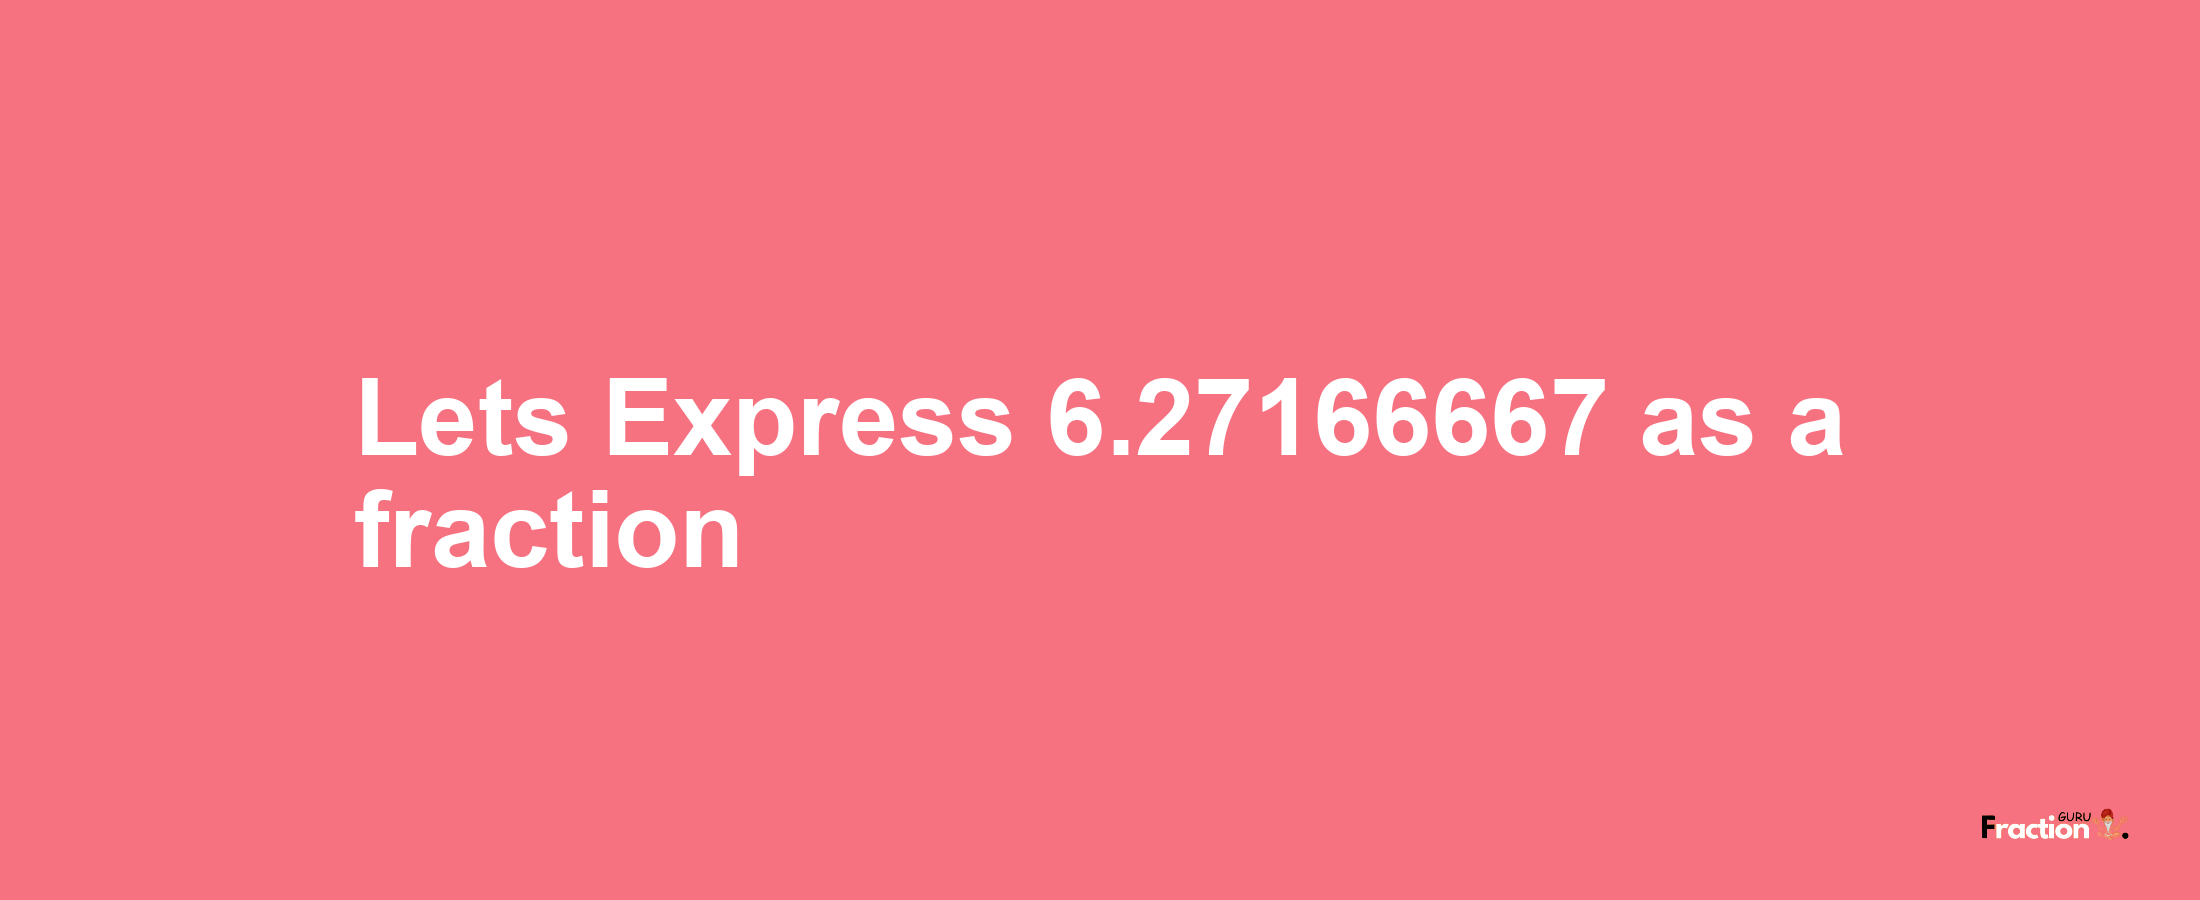 Lets Express 6.27166667 as afraction